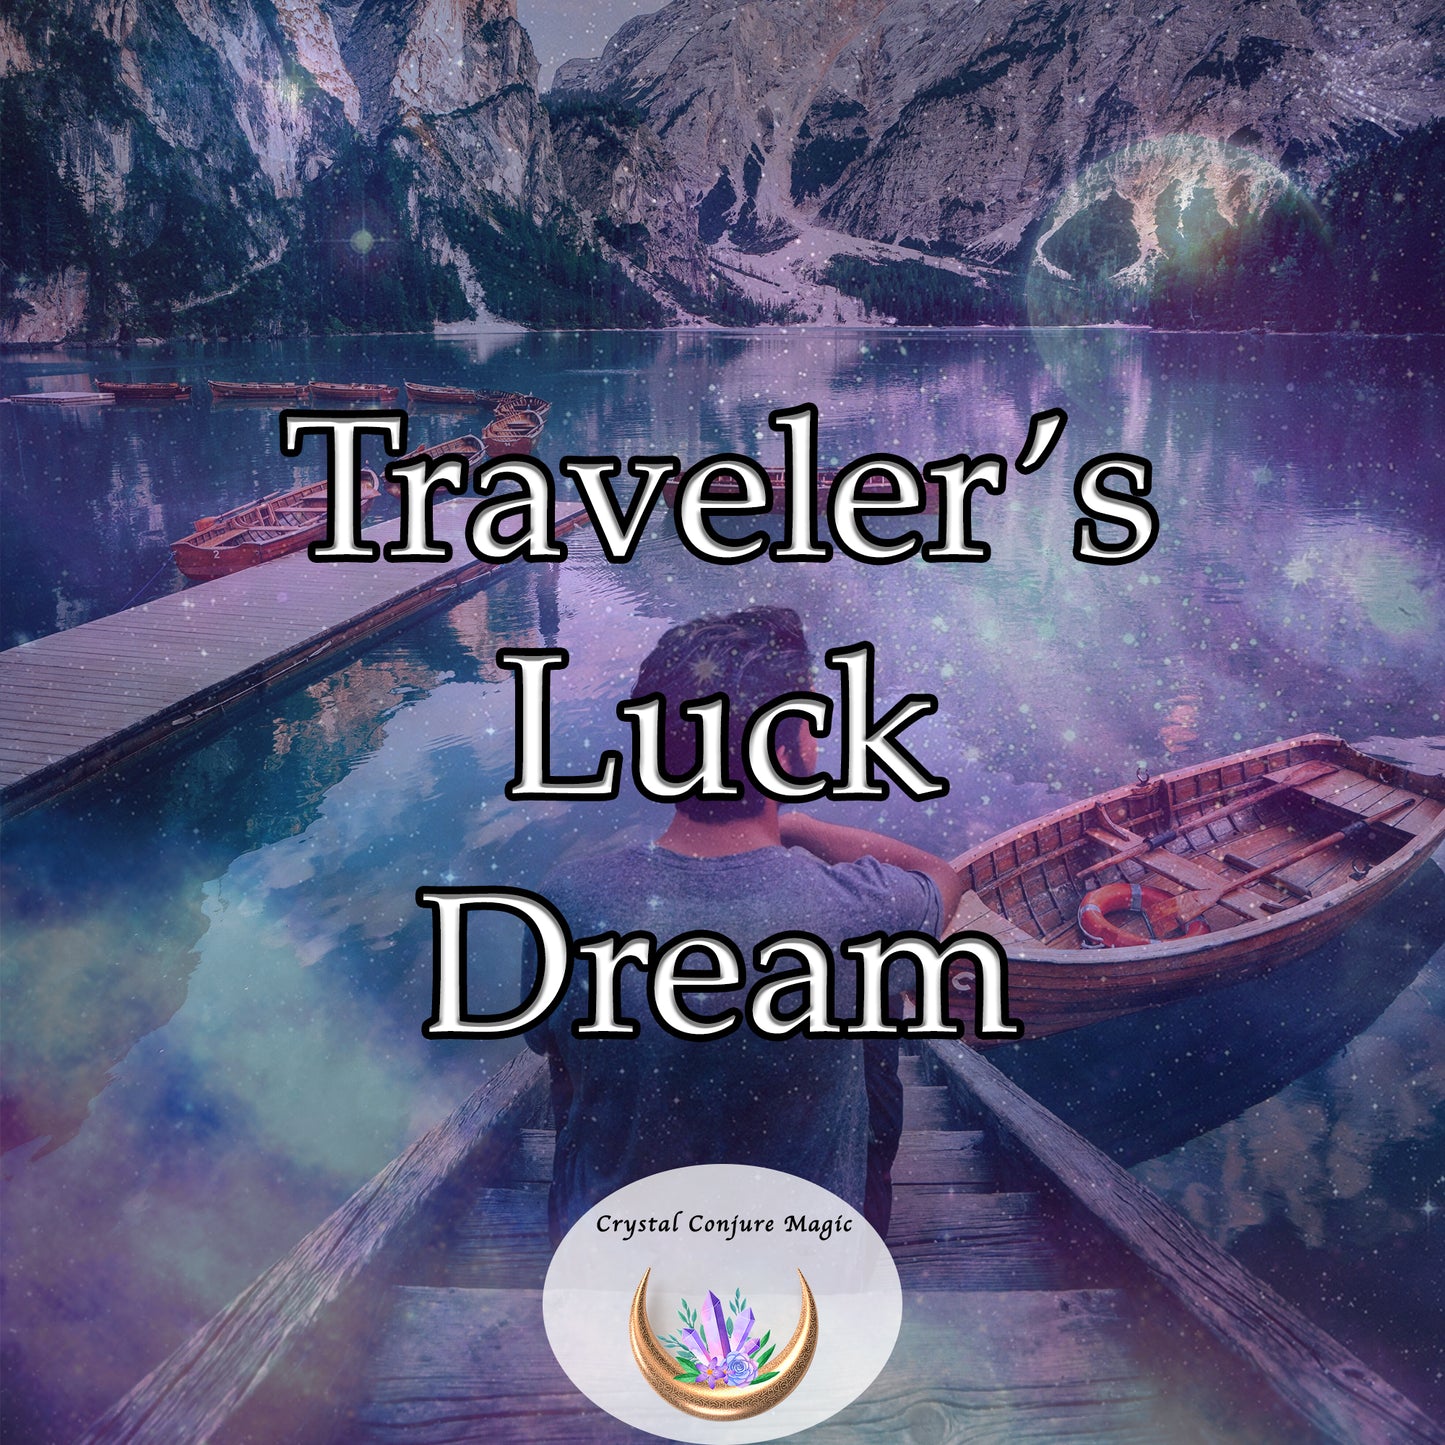 Traveler's Luck Dream - infuse your journey with good fortune and protection every step of the way